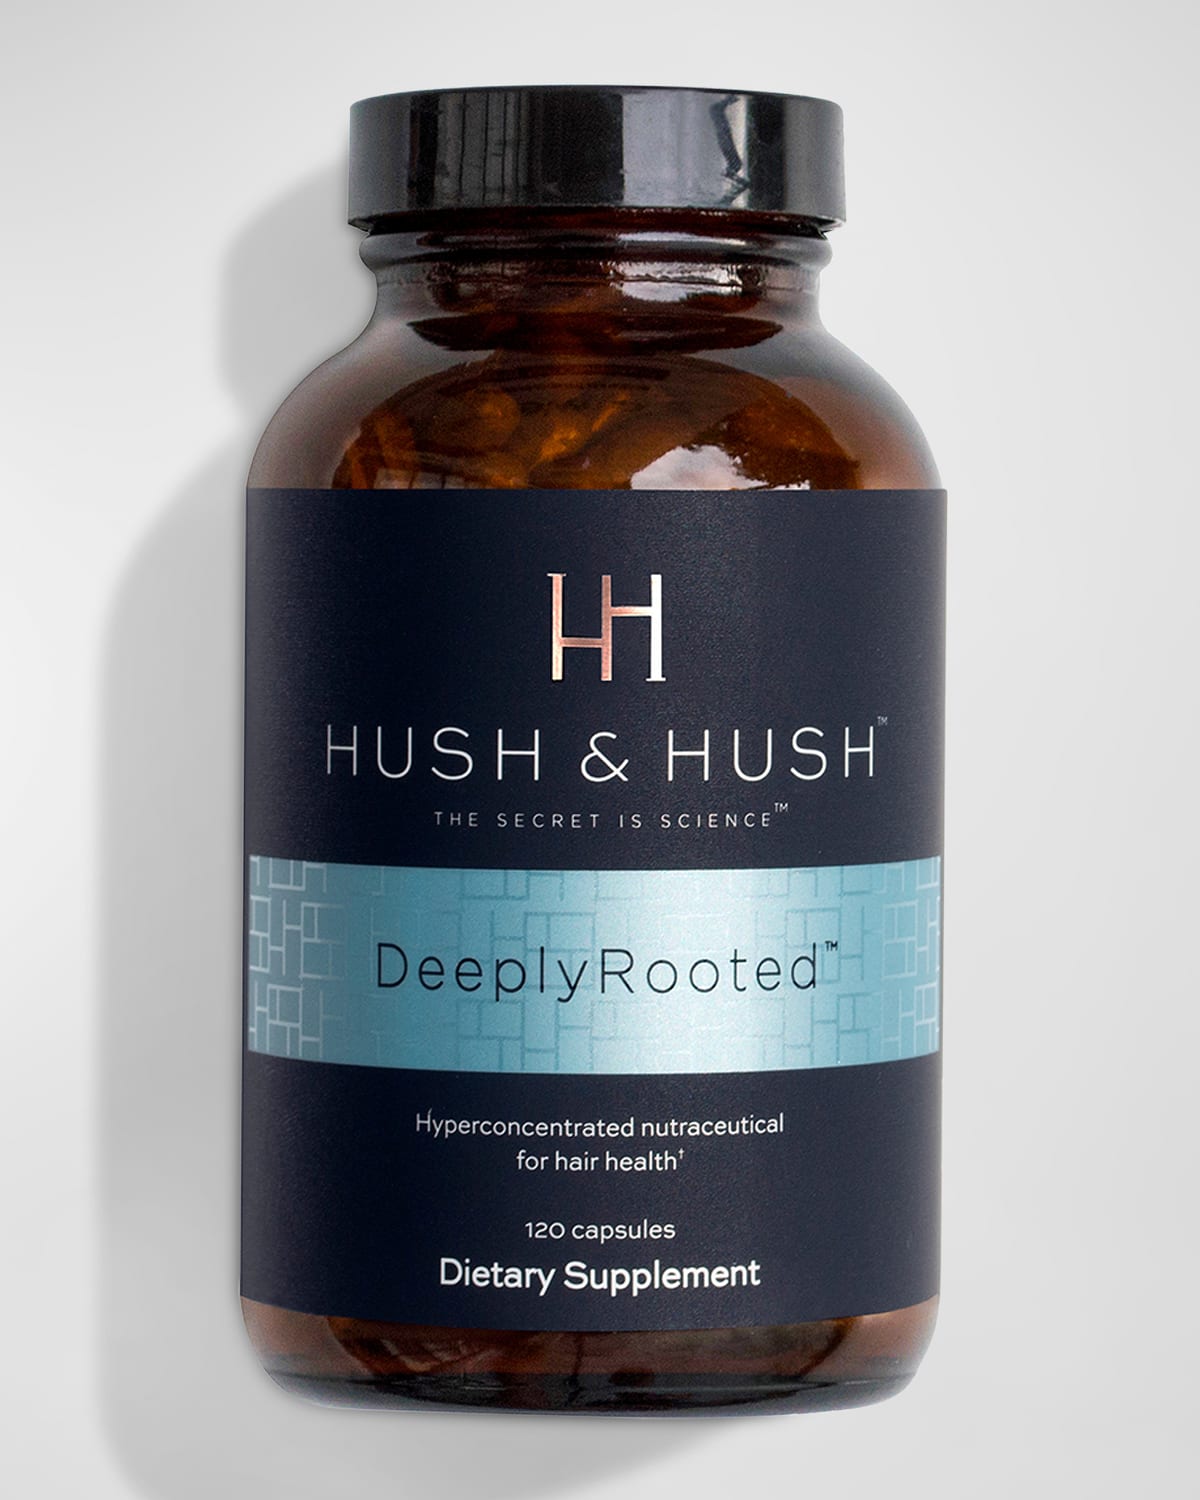 DeeplyRooted Supplement - 120 Capsules